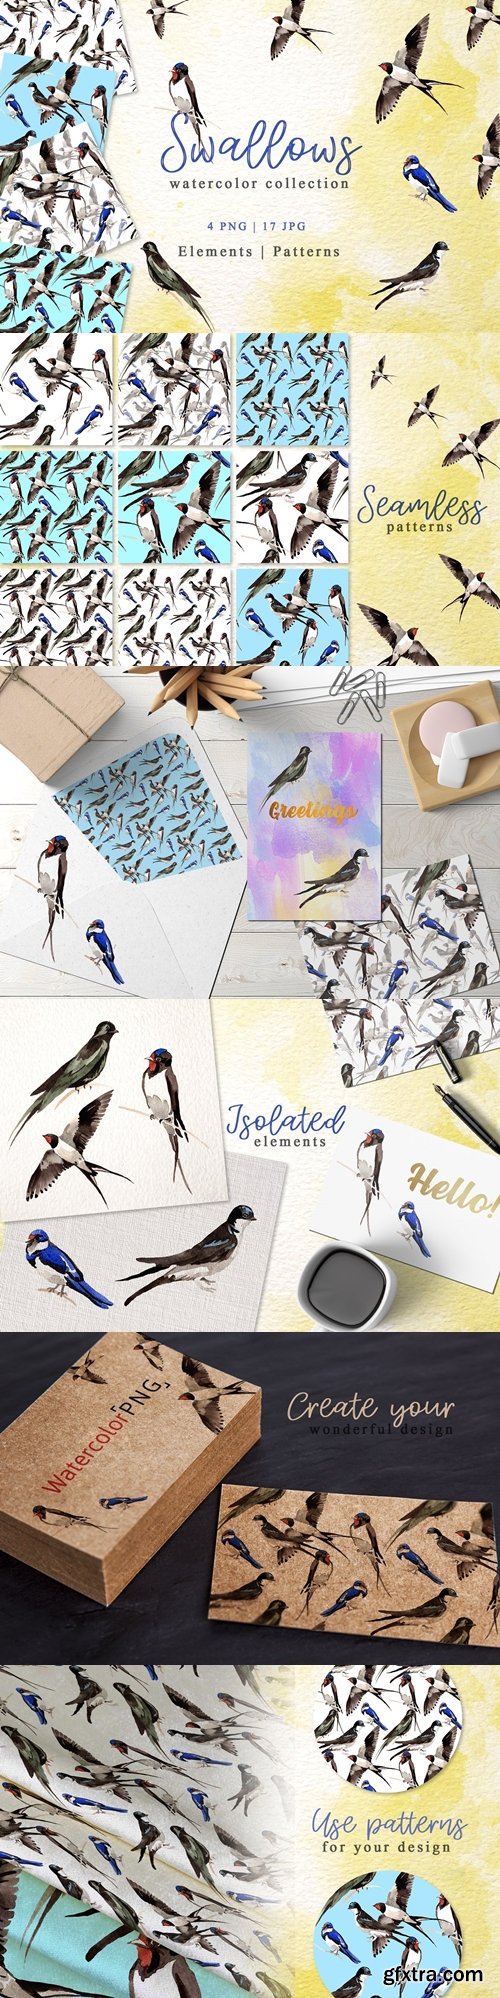 CM - Swallows Watercolor png 3415554